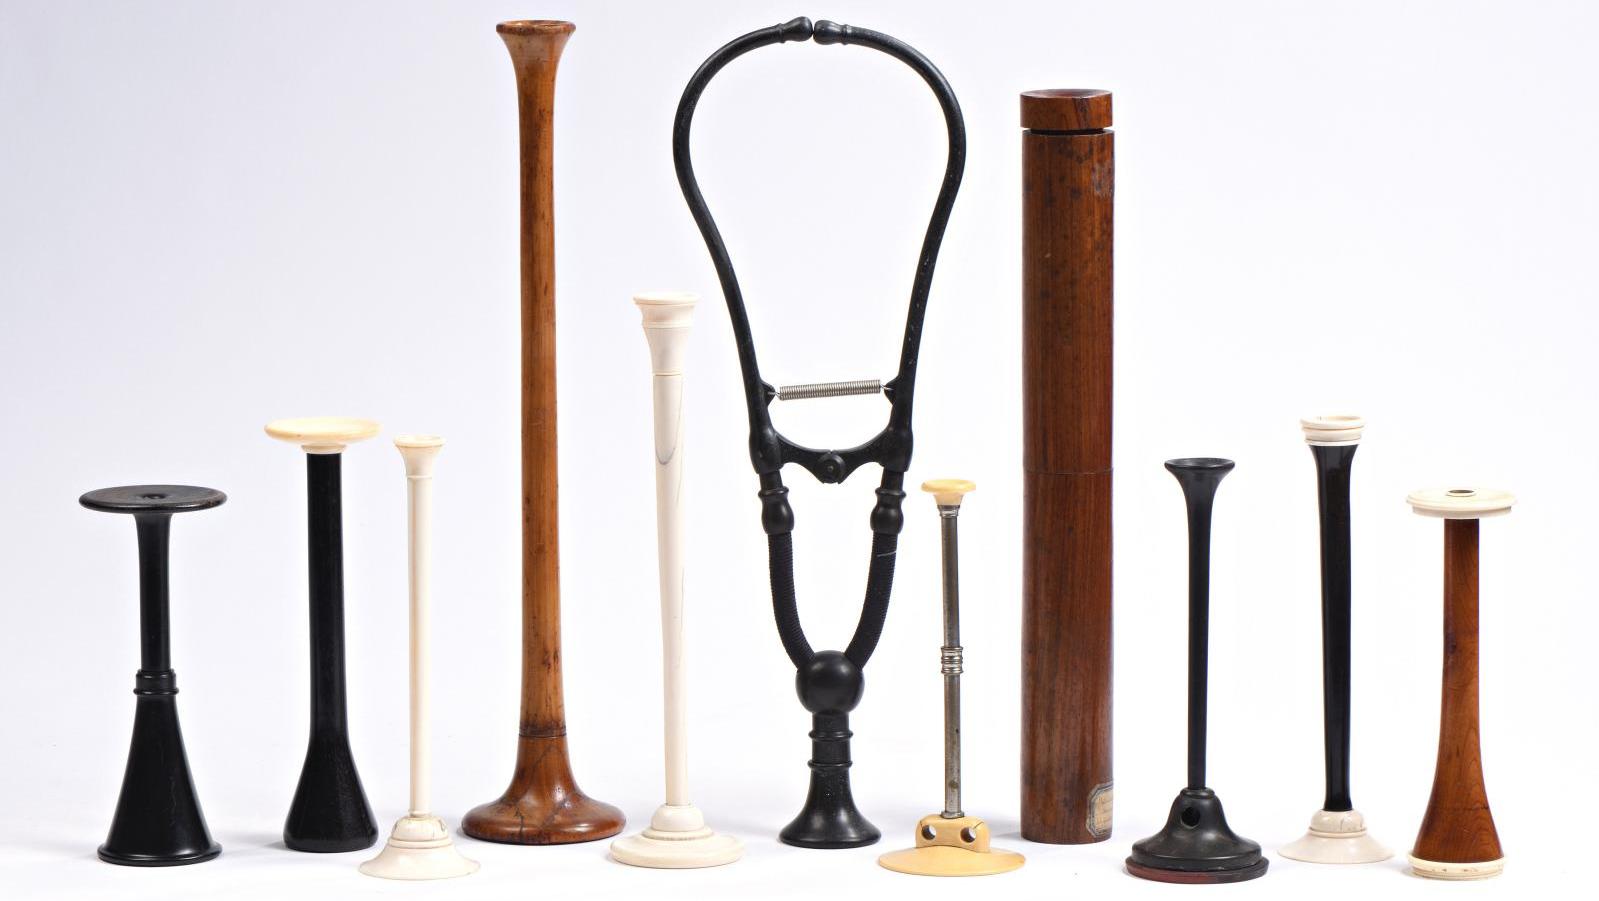 Collection of stethoscopes, including the cedarwood screwed model invented by Laennec... The Art of Medicine